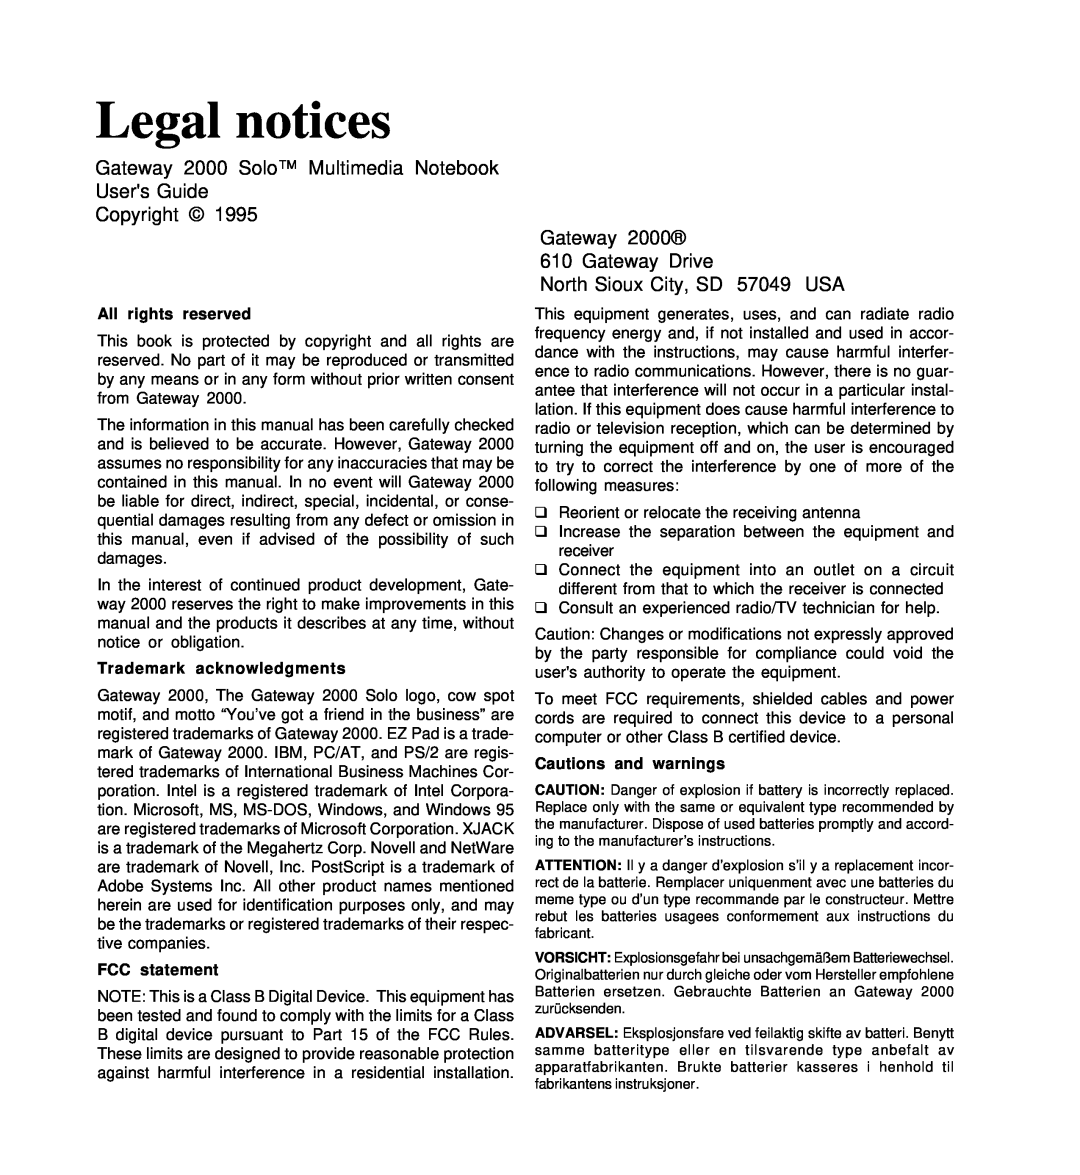 Gateway SYSMAN017AAUS Legal notices, Gateway 2000 Solo Multimedia Notebook Users Guide Copyright, All rights reserved 